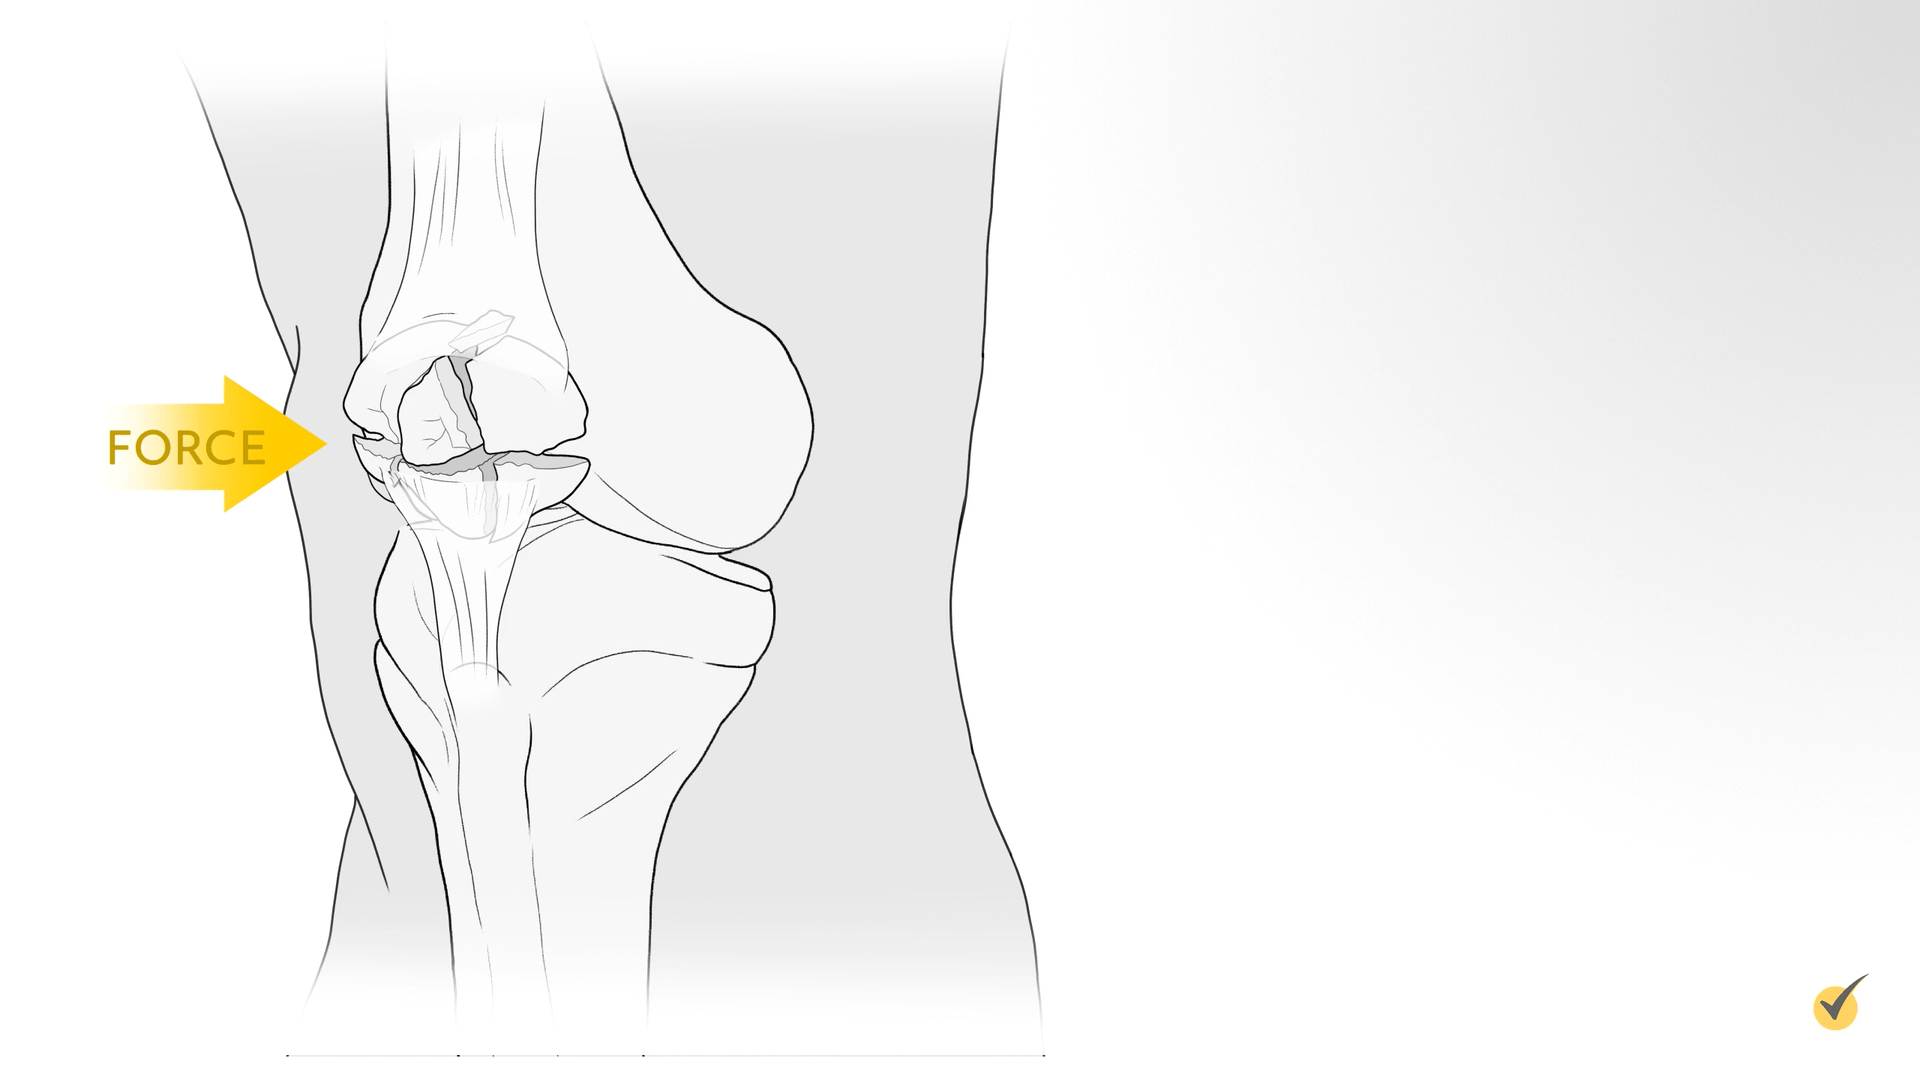 Example of force breaking the patella